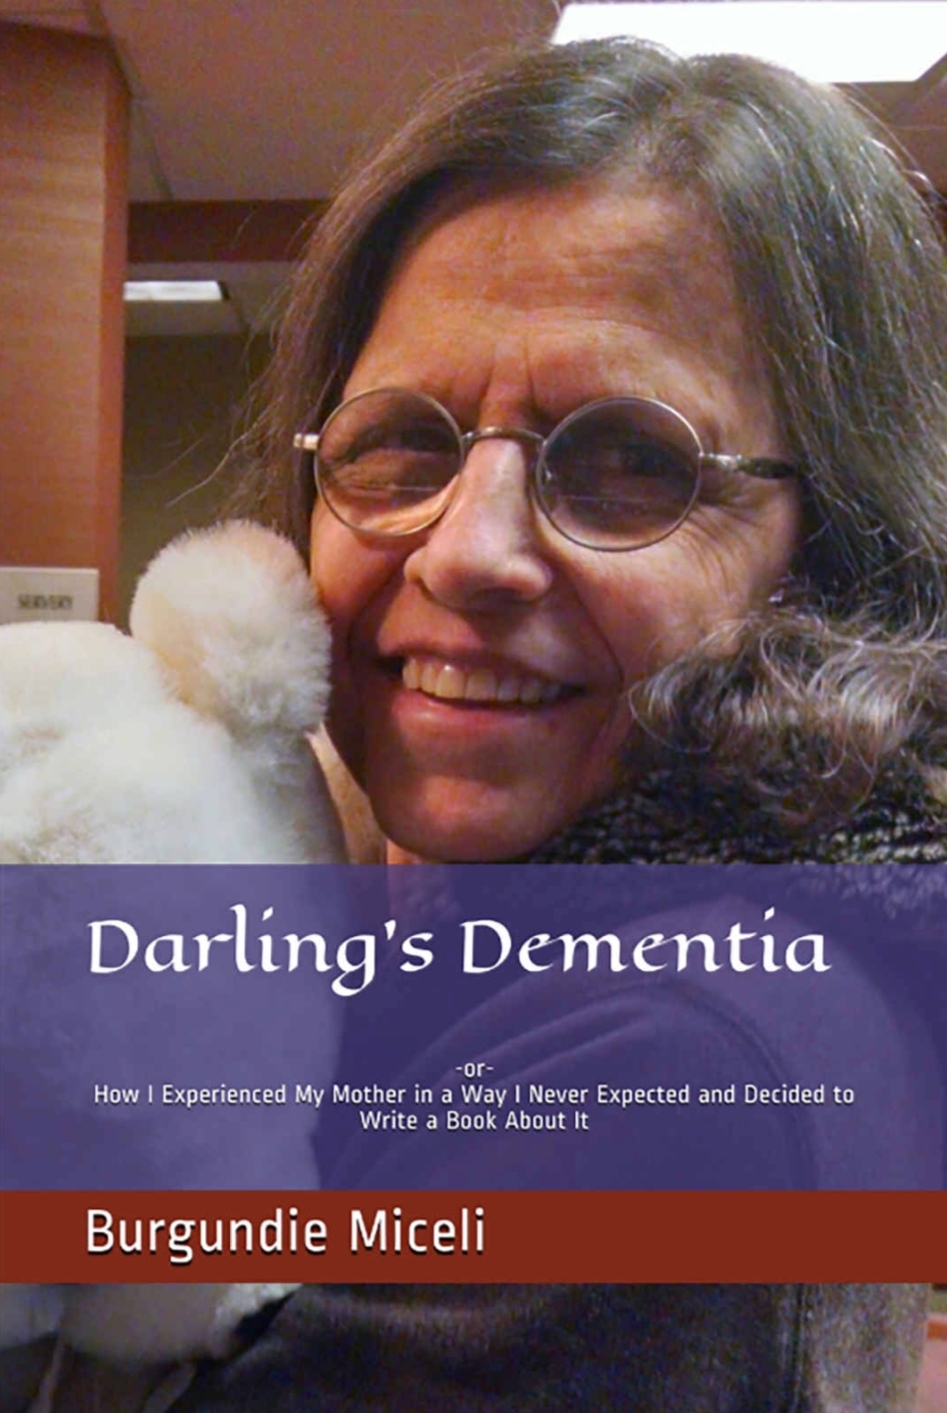 Darling’s Dementia: -or- How I Experienced My Mother in a Way I Never Expected and Decided to Write a Book About It  .